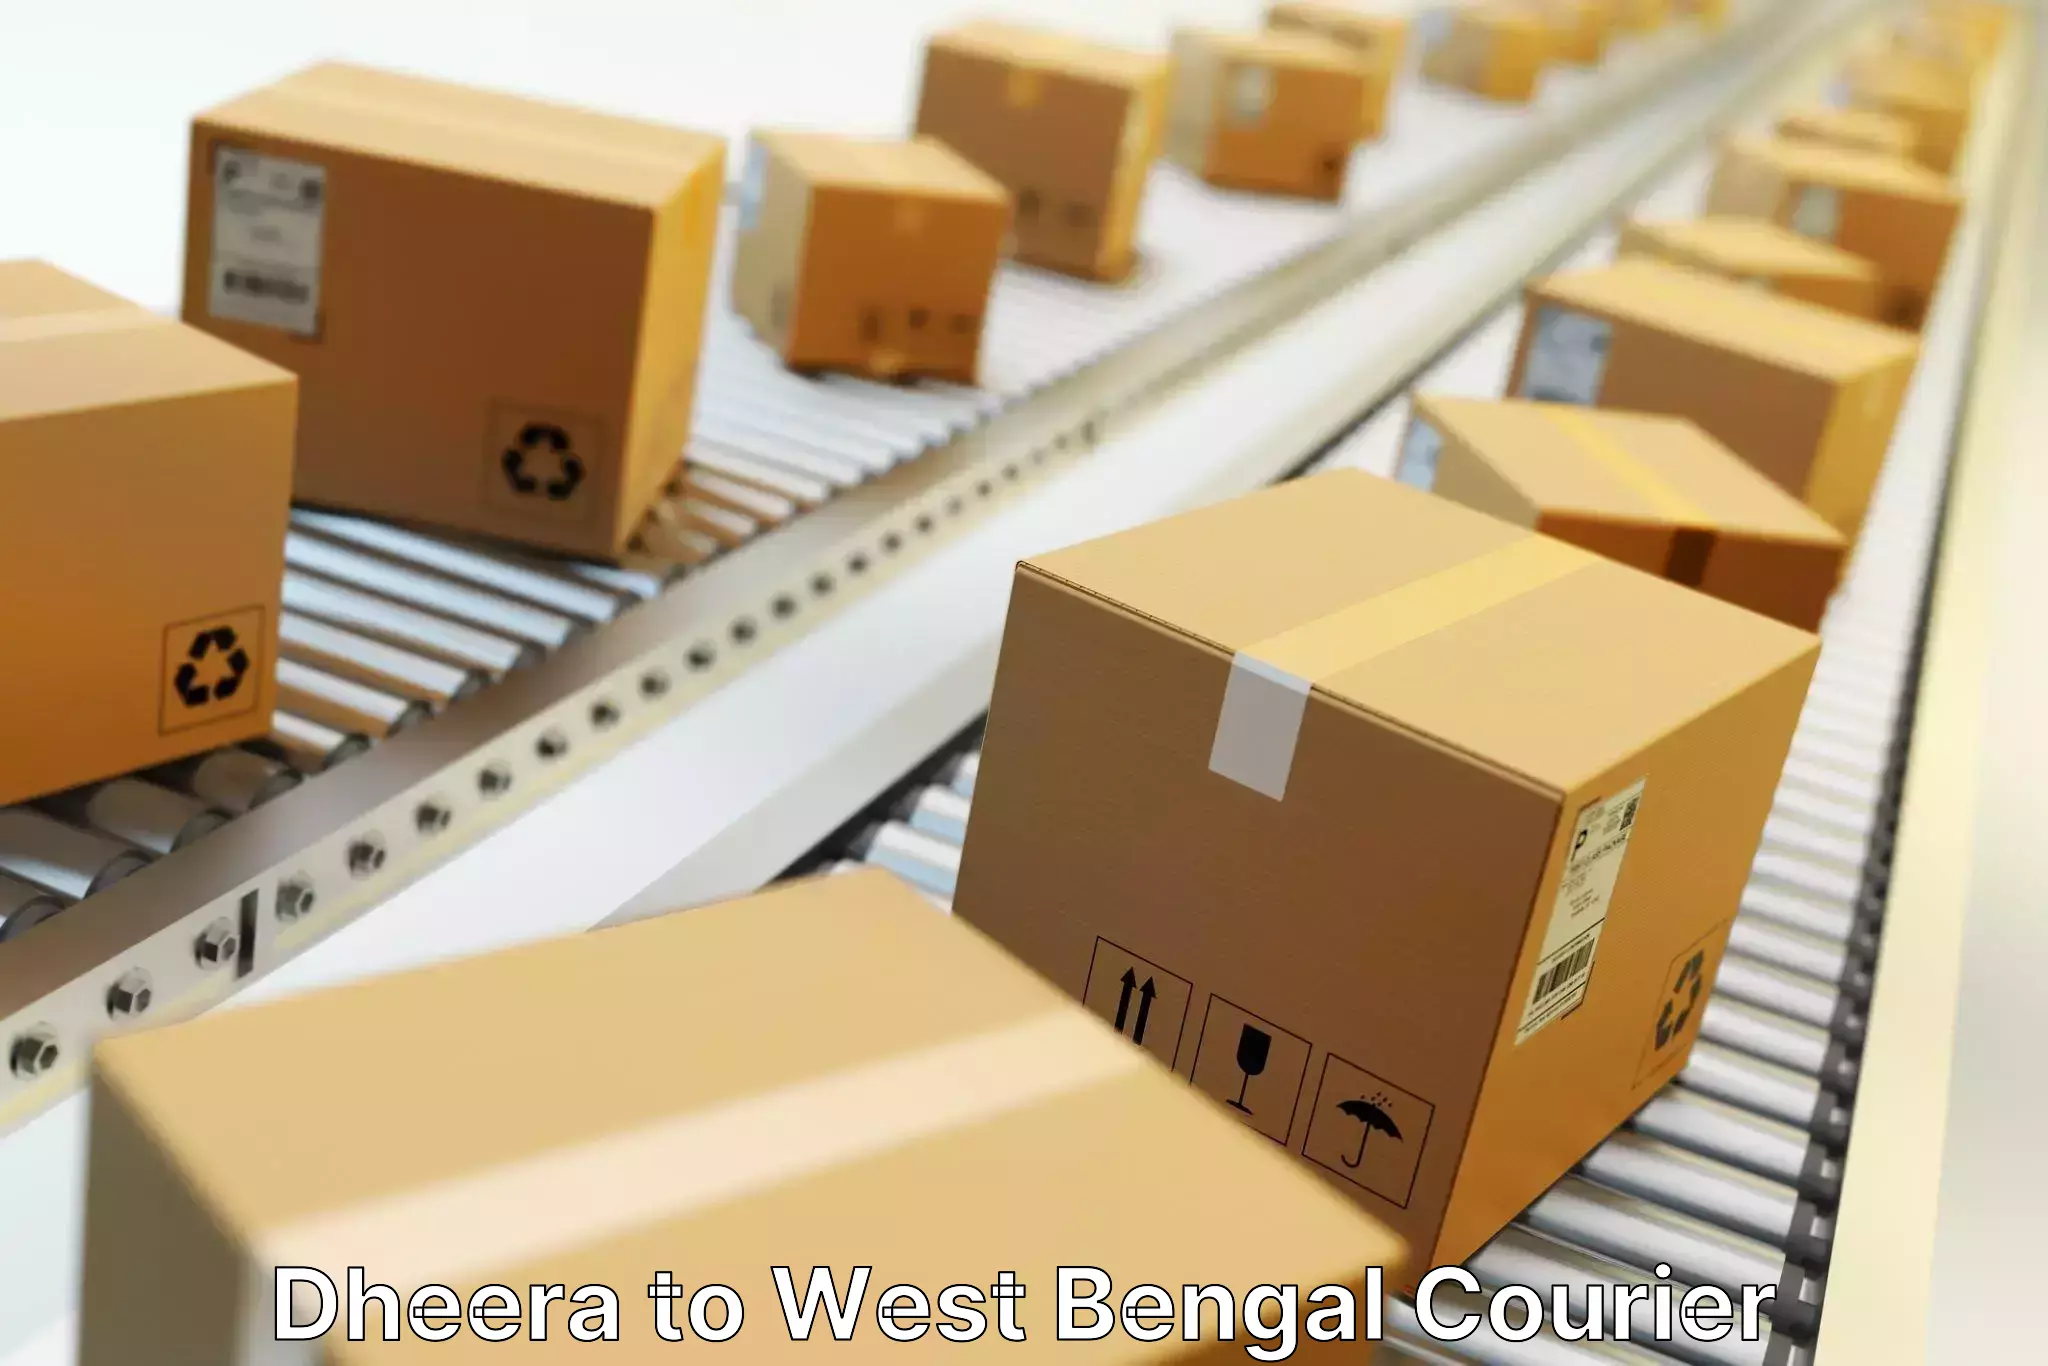 Seamless shipping experience Dheera to West Bengal